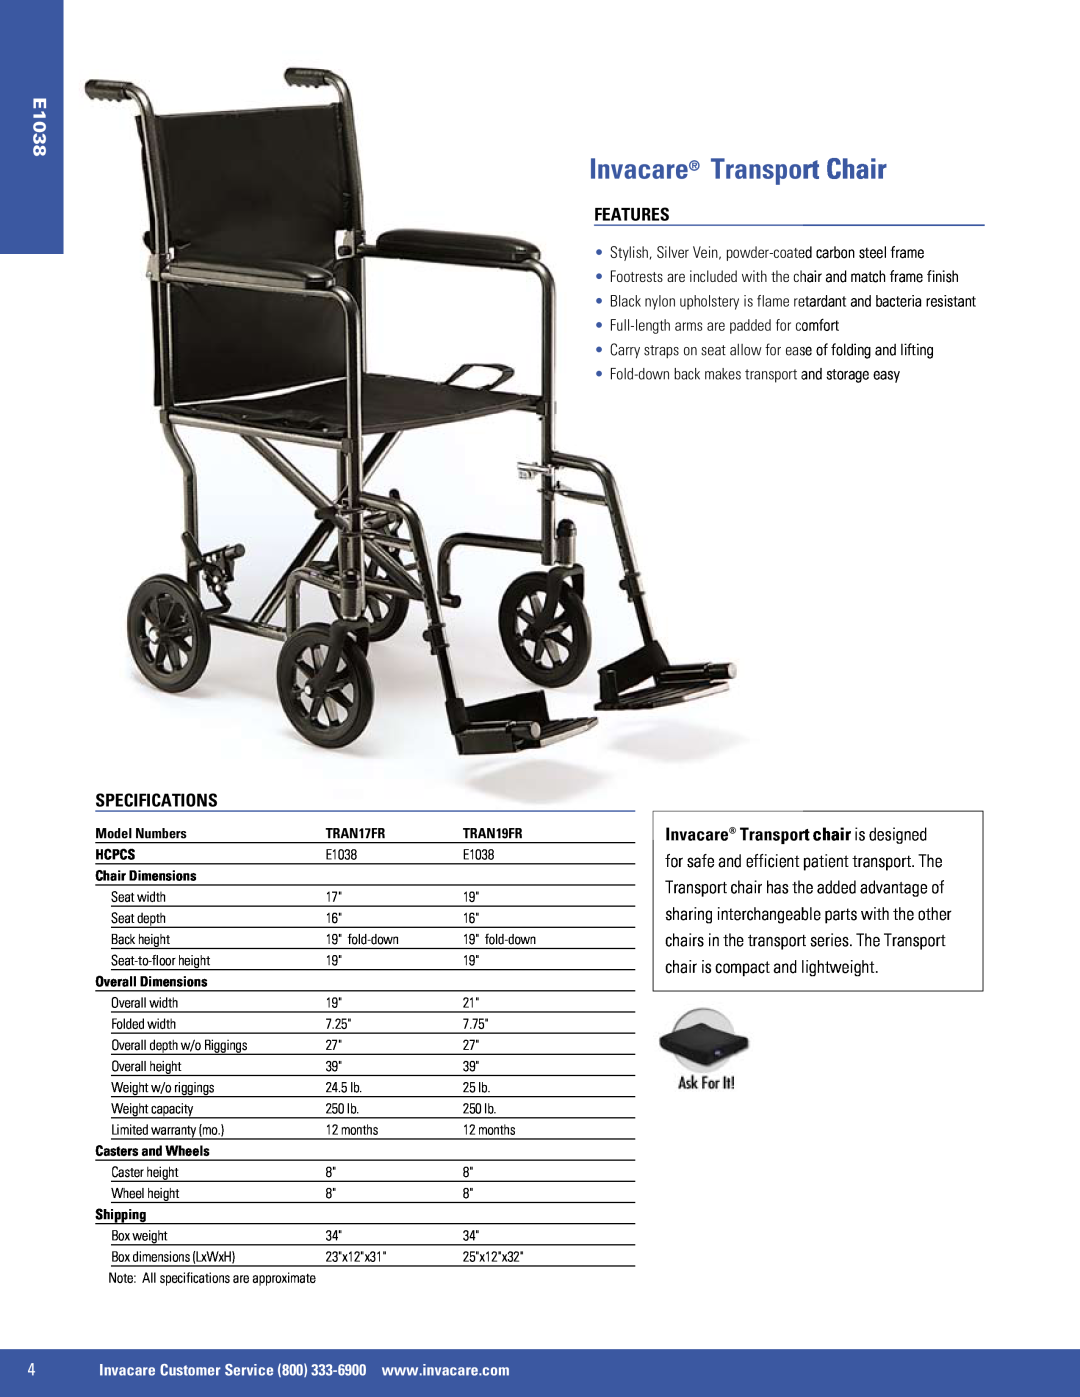 Invacare 9000 XT, SX5 Invacare Transport Chair, E1038, Features, Specifications, Full-length arms are padded for comfort 